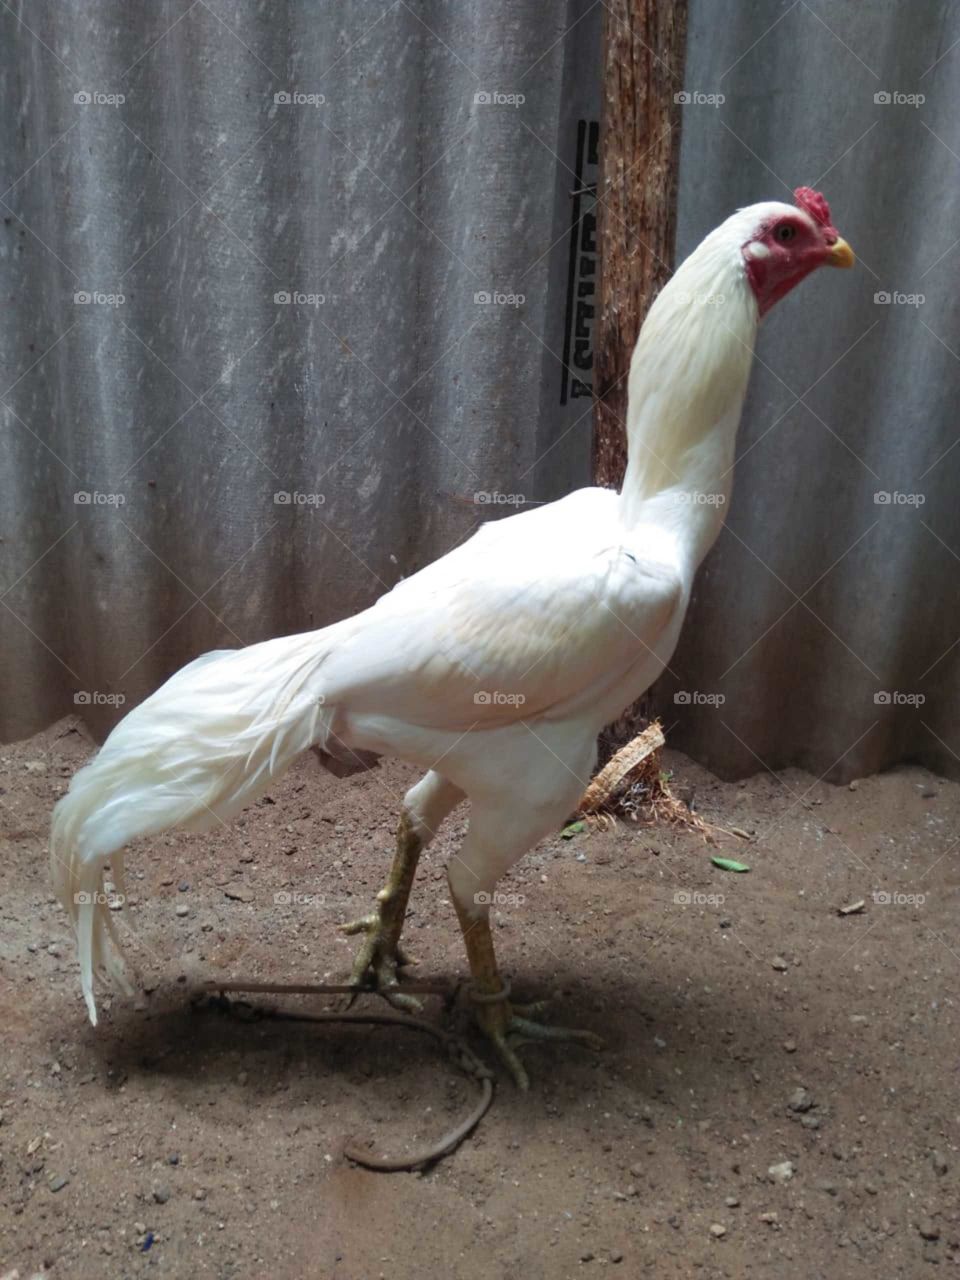 White is the white country hen